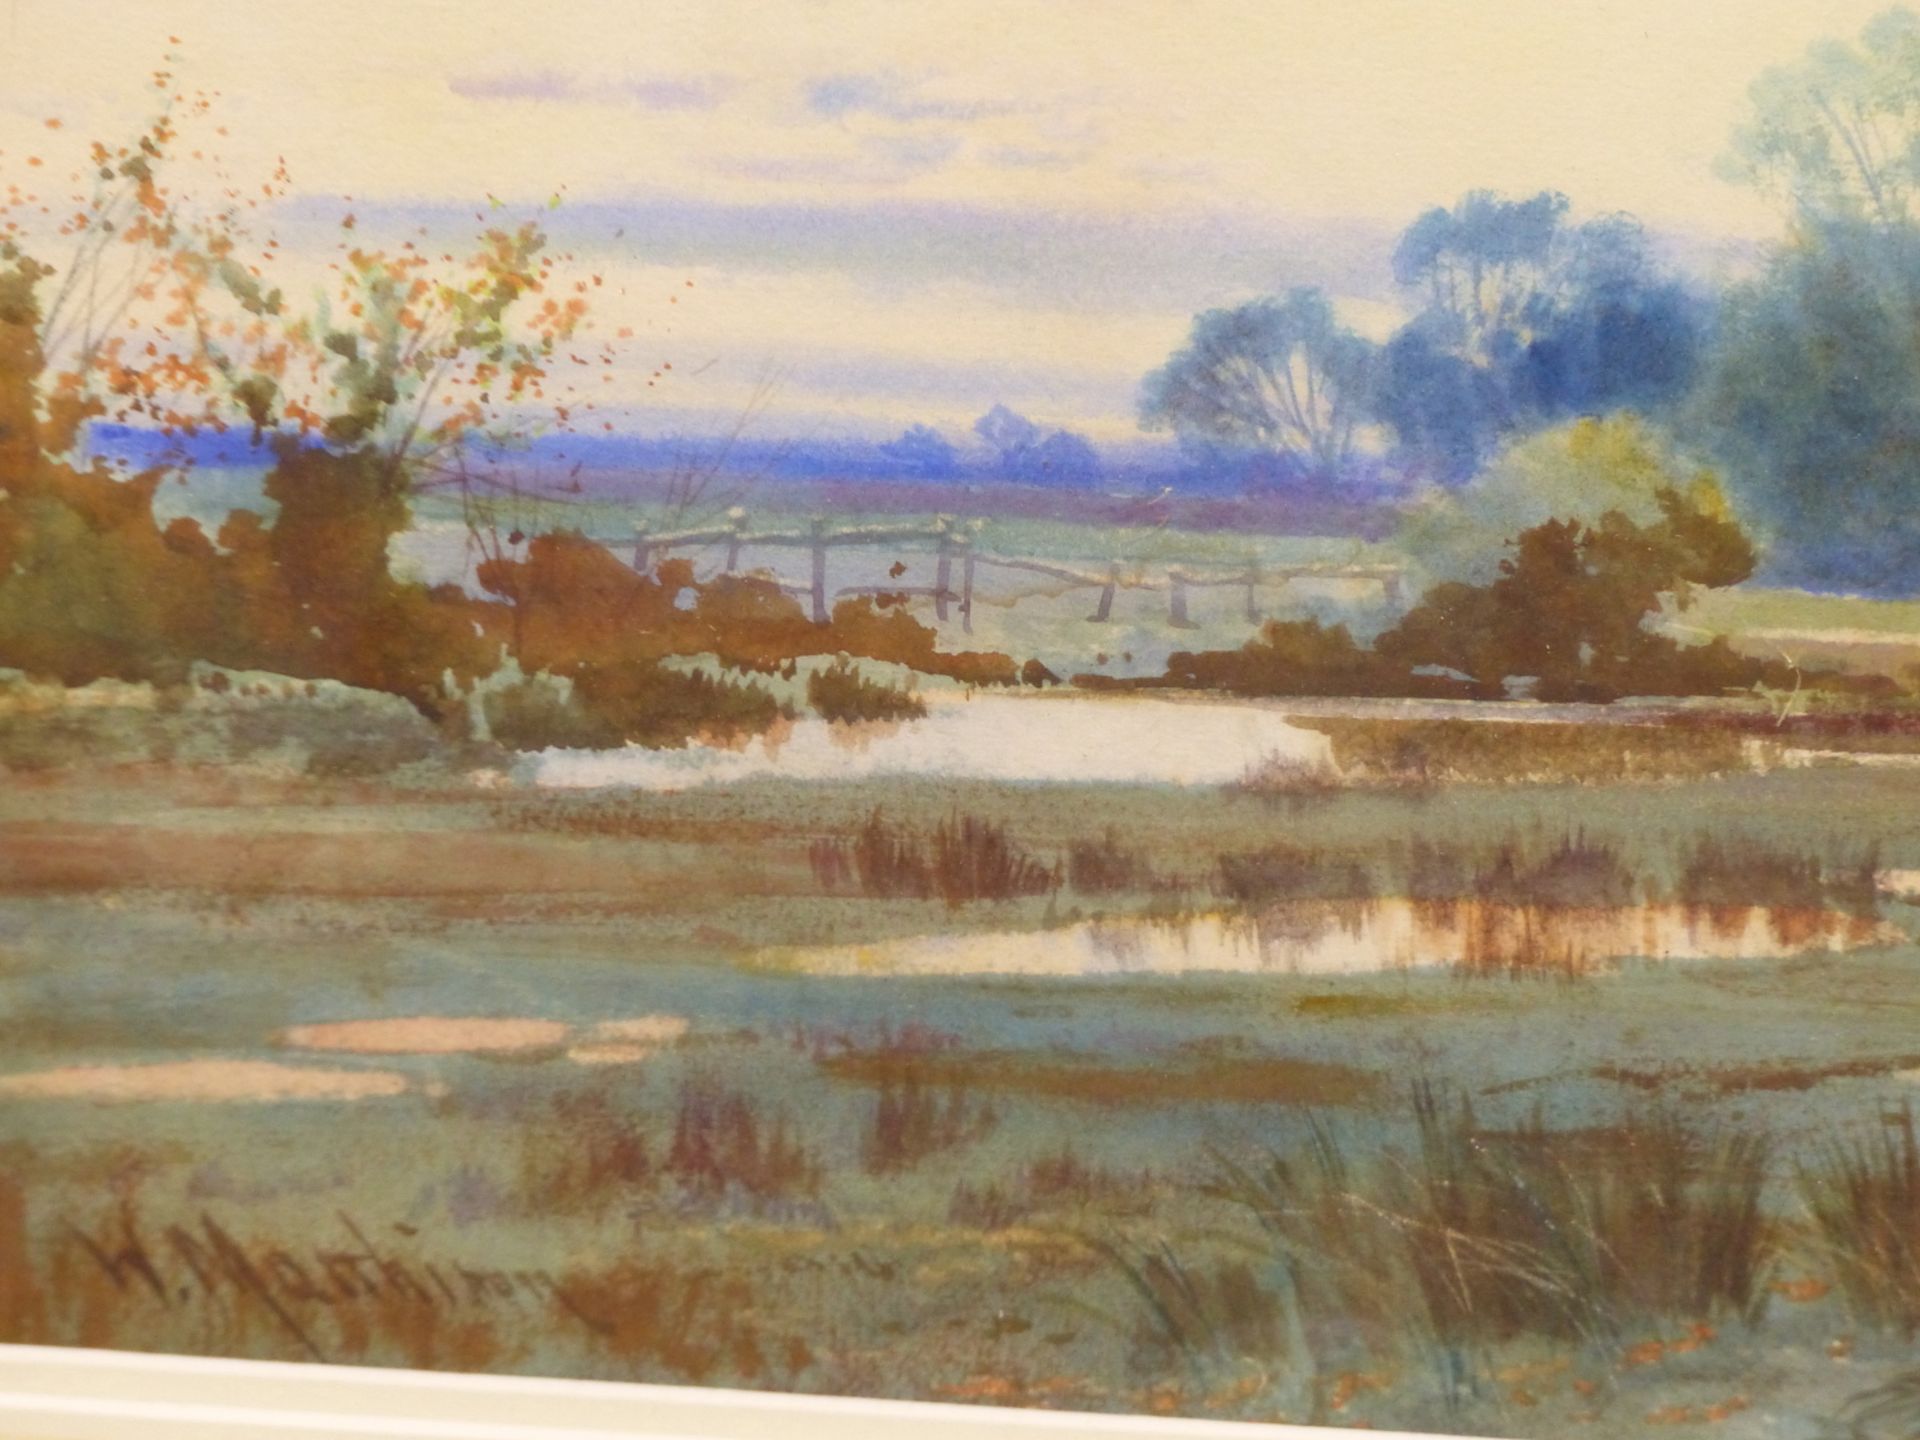 WILLIAM MATHISON (FL.1883-1923) SHEEP IN A RIVERSIDE MEADOW, WATERCOLOUR, SIGNED LOWER LEFT. 71 X 47 - Image 5 of 7